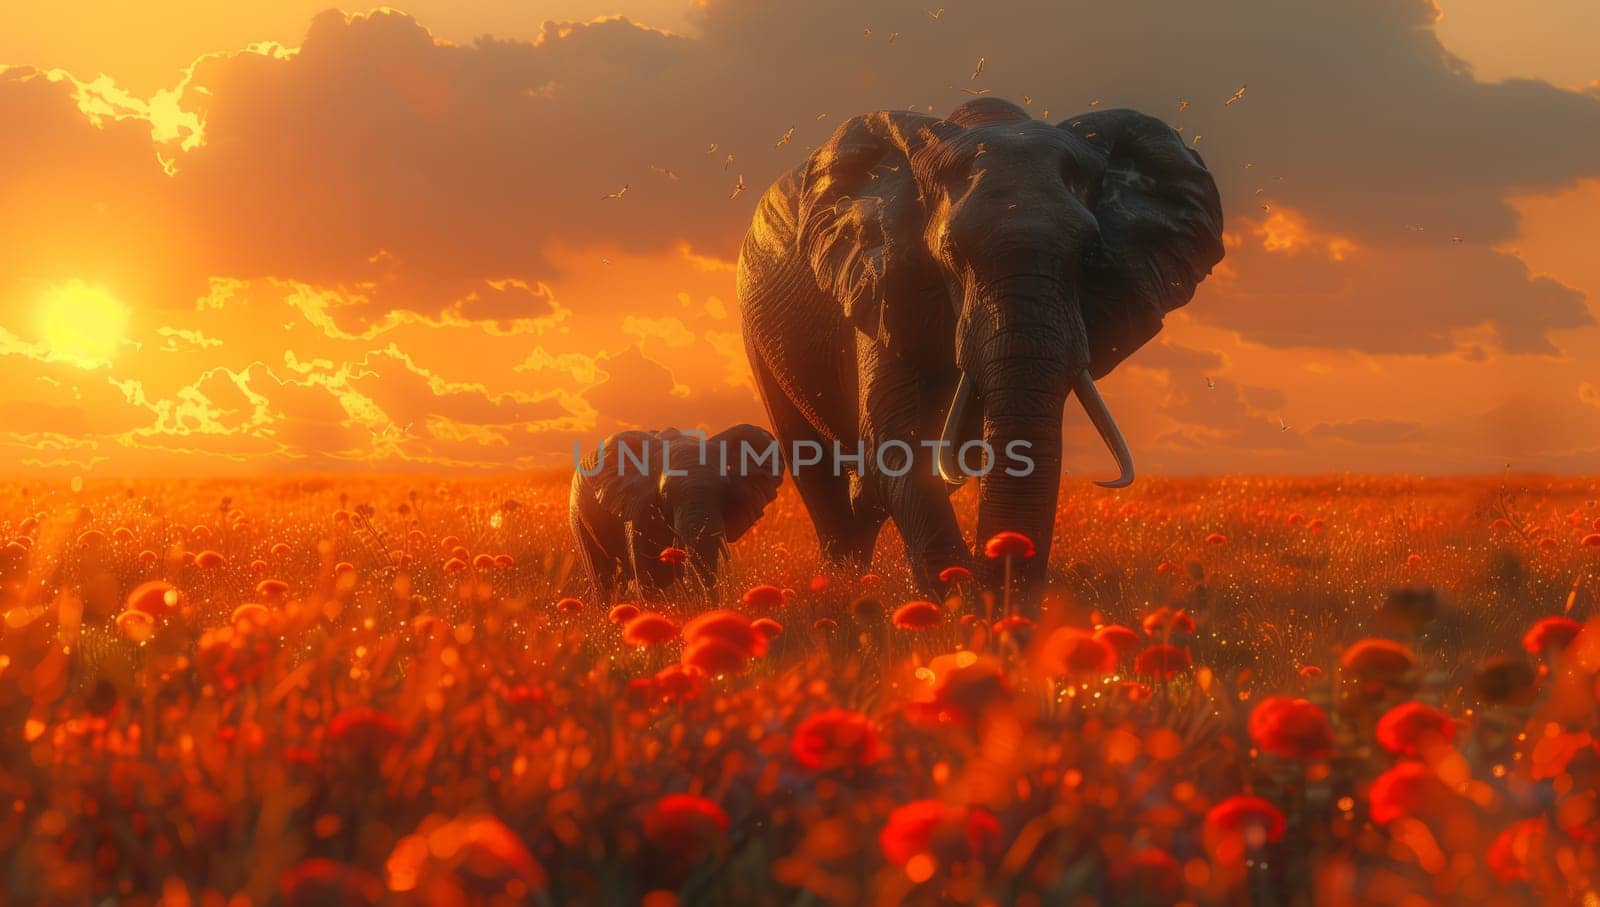 Two elephants are strolling through a field filled with red flowers at sunset, under a colorful sky. The natural landscape is truly beautiful